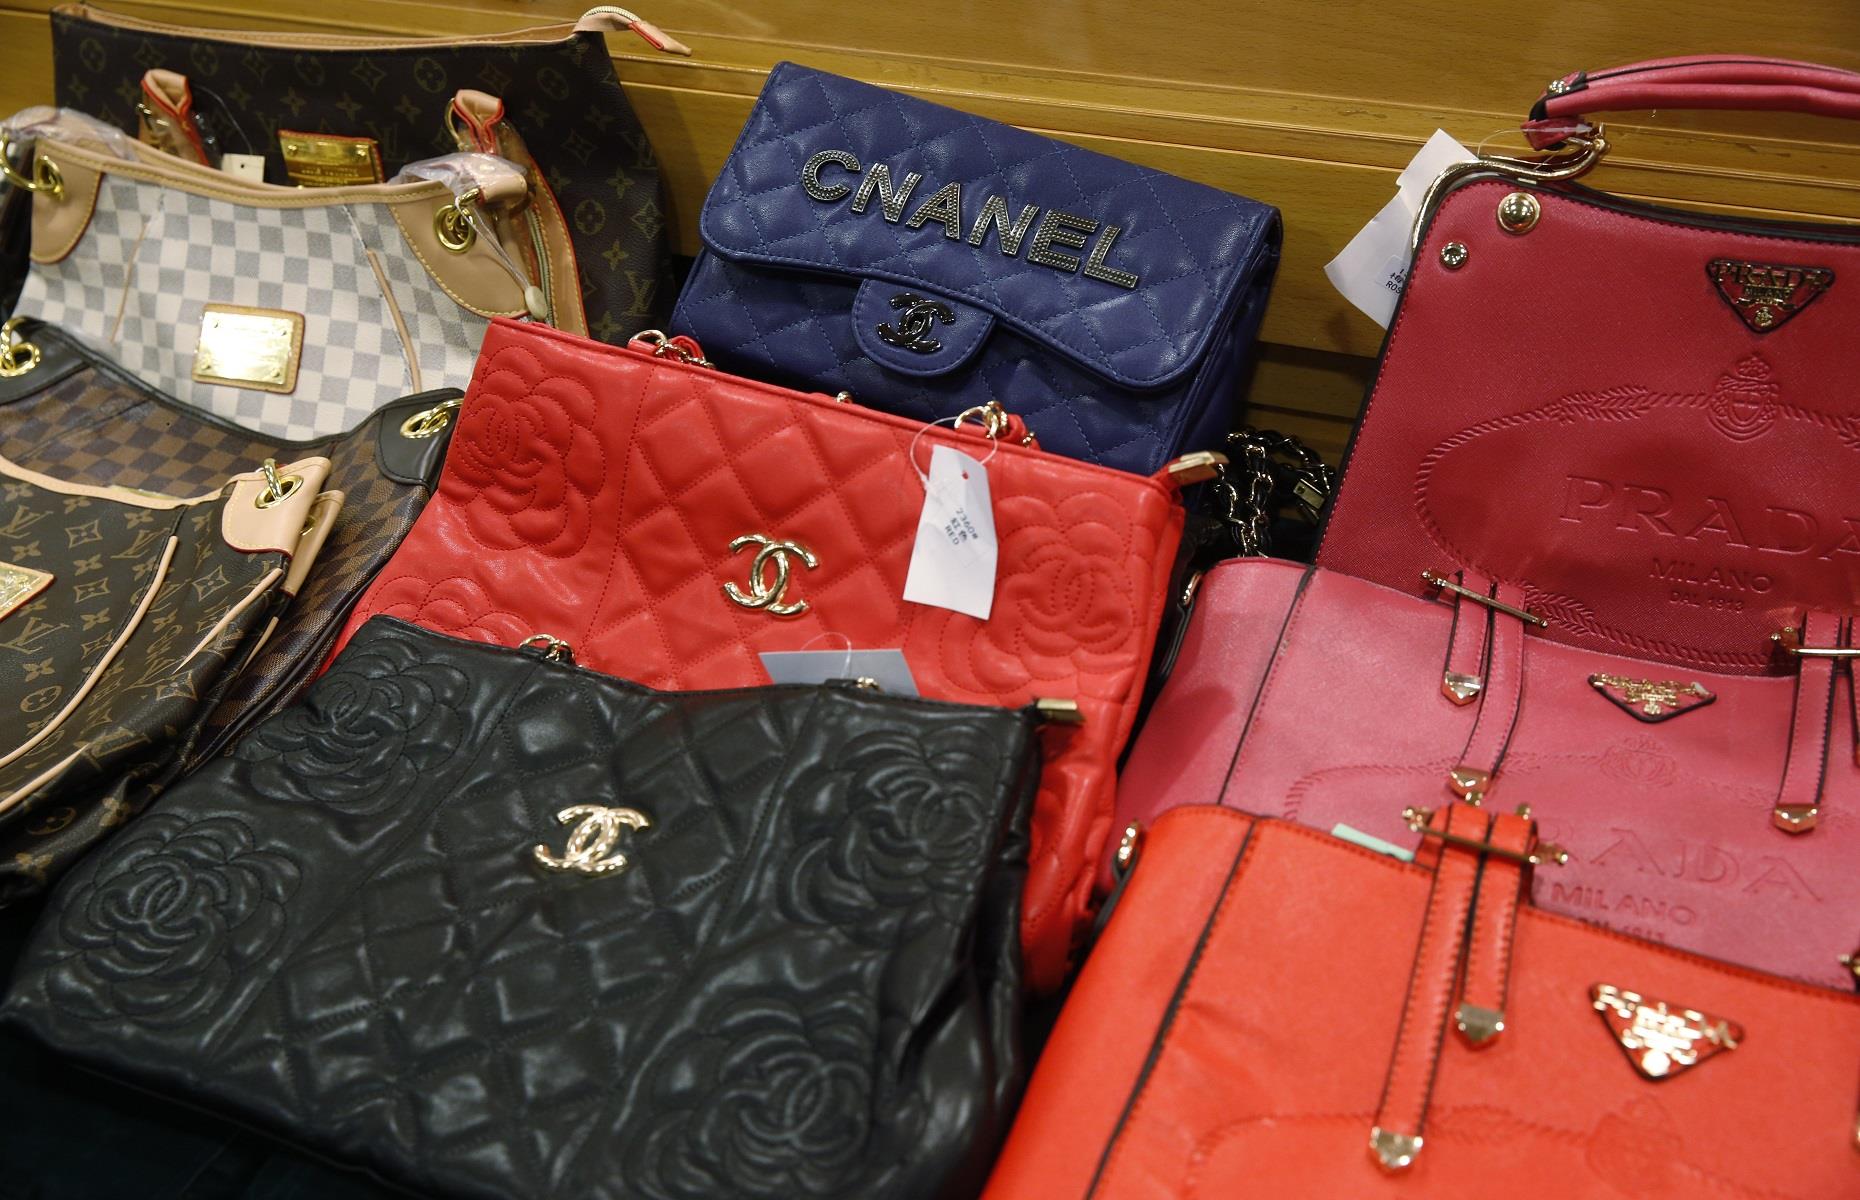 What Are The Top Five Most Counterfeited Handbags Available?